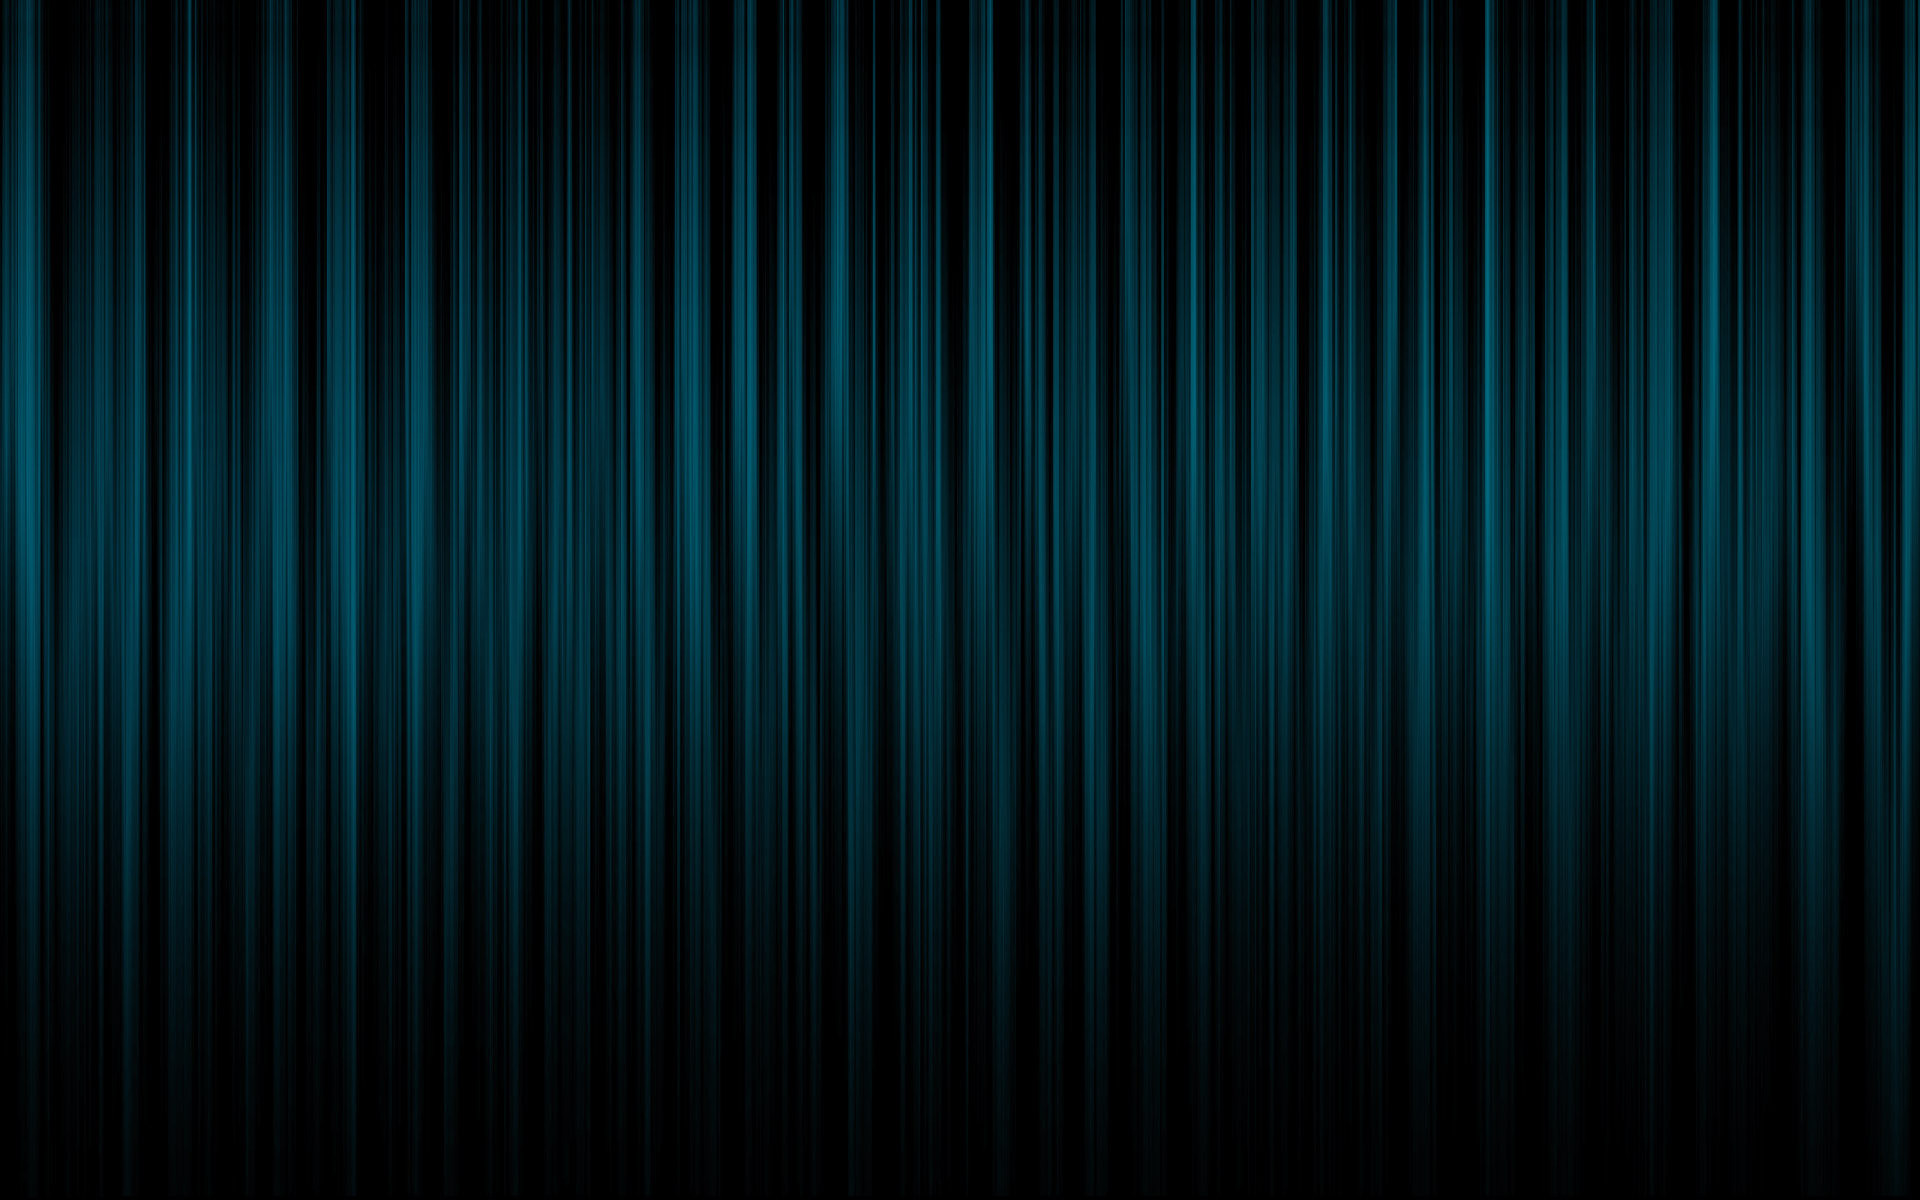 1920x1200 sea-green-lining-curtain-with-black-background-3d -gaming-hd-wallpapers-1920-x-12001.